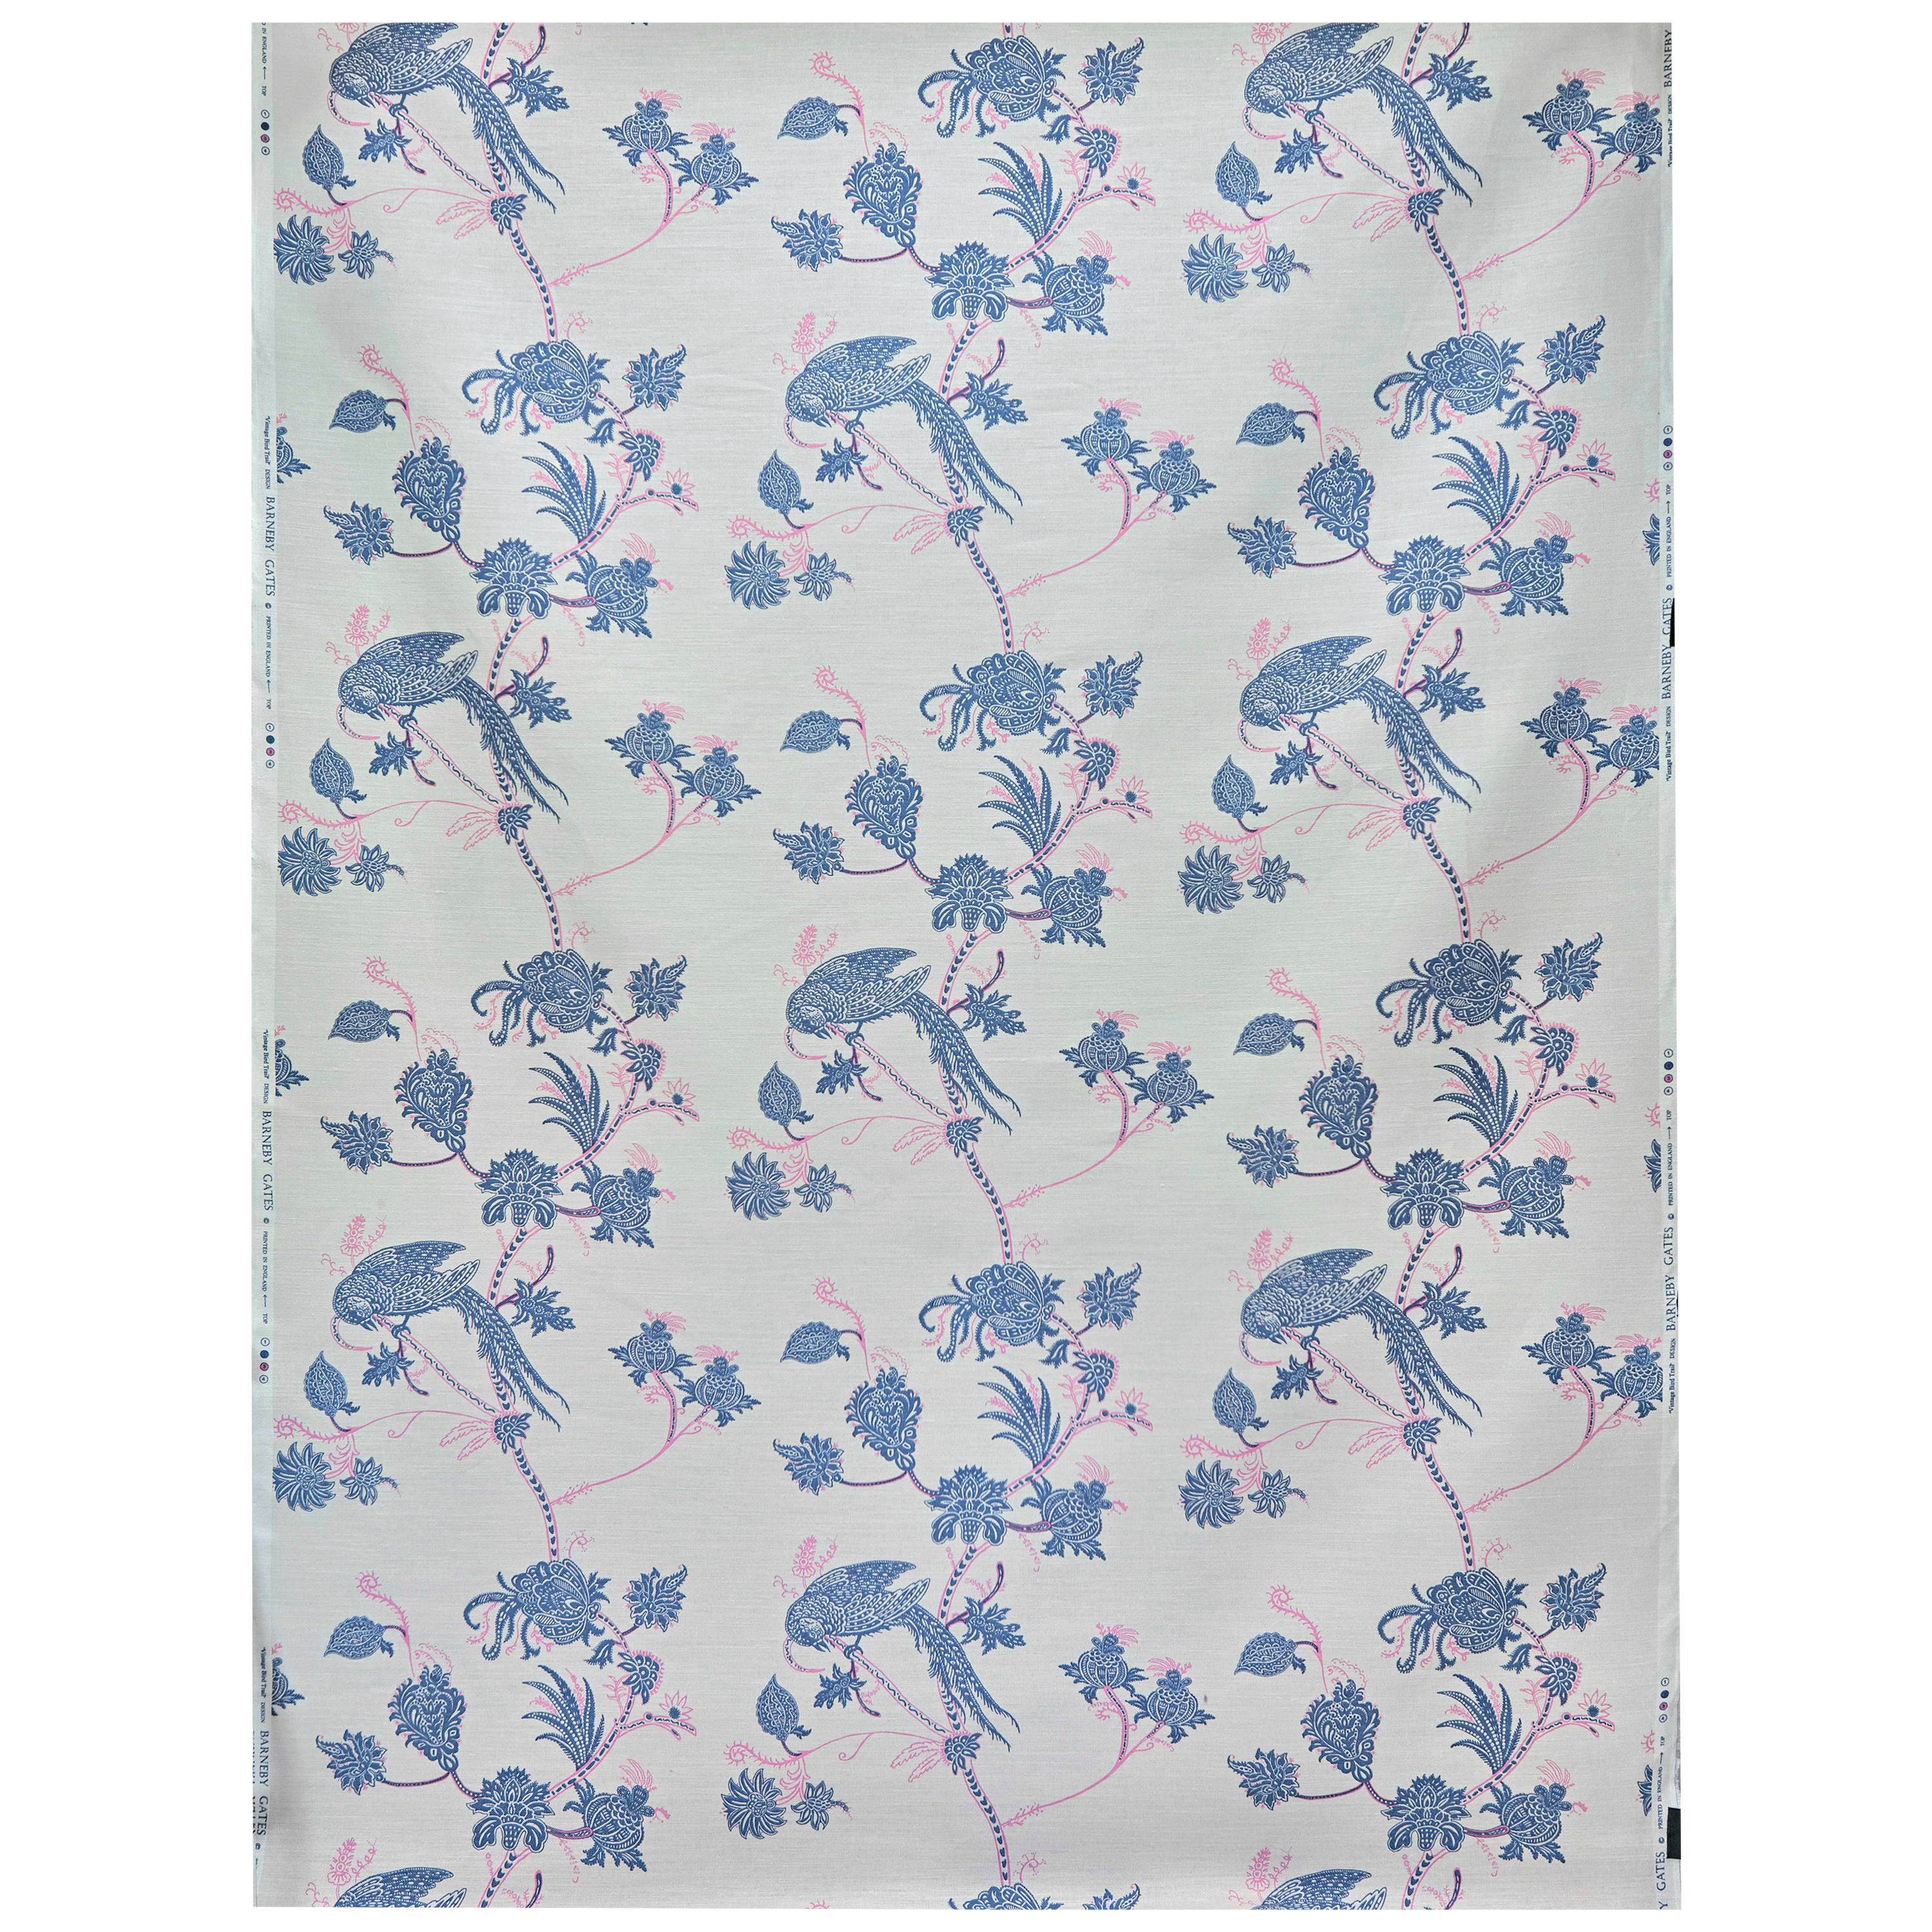 'Vintage Bird Trail' Contemporary, Traditional Fabric in Blue/Pink For Sale